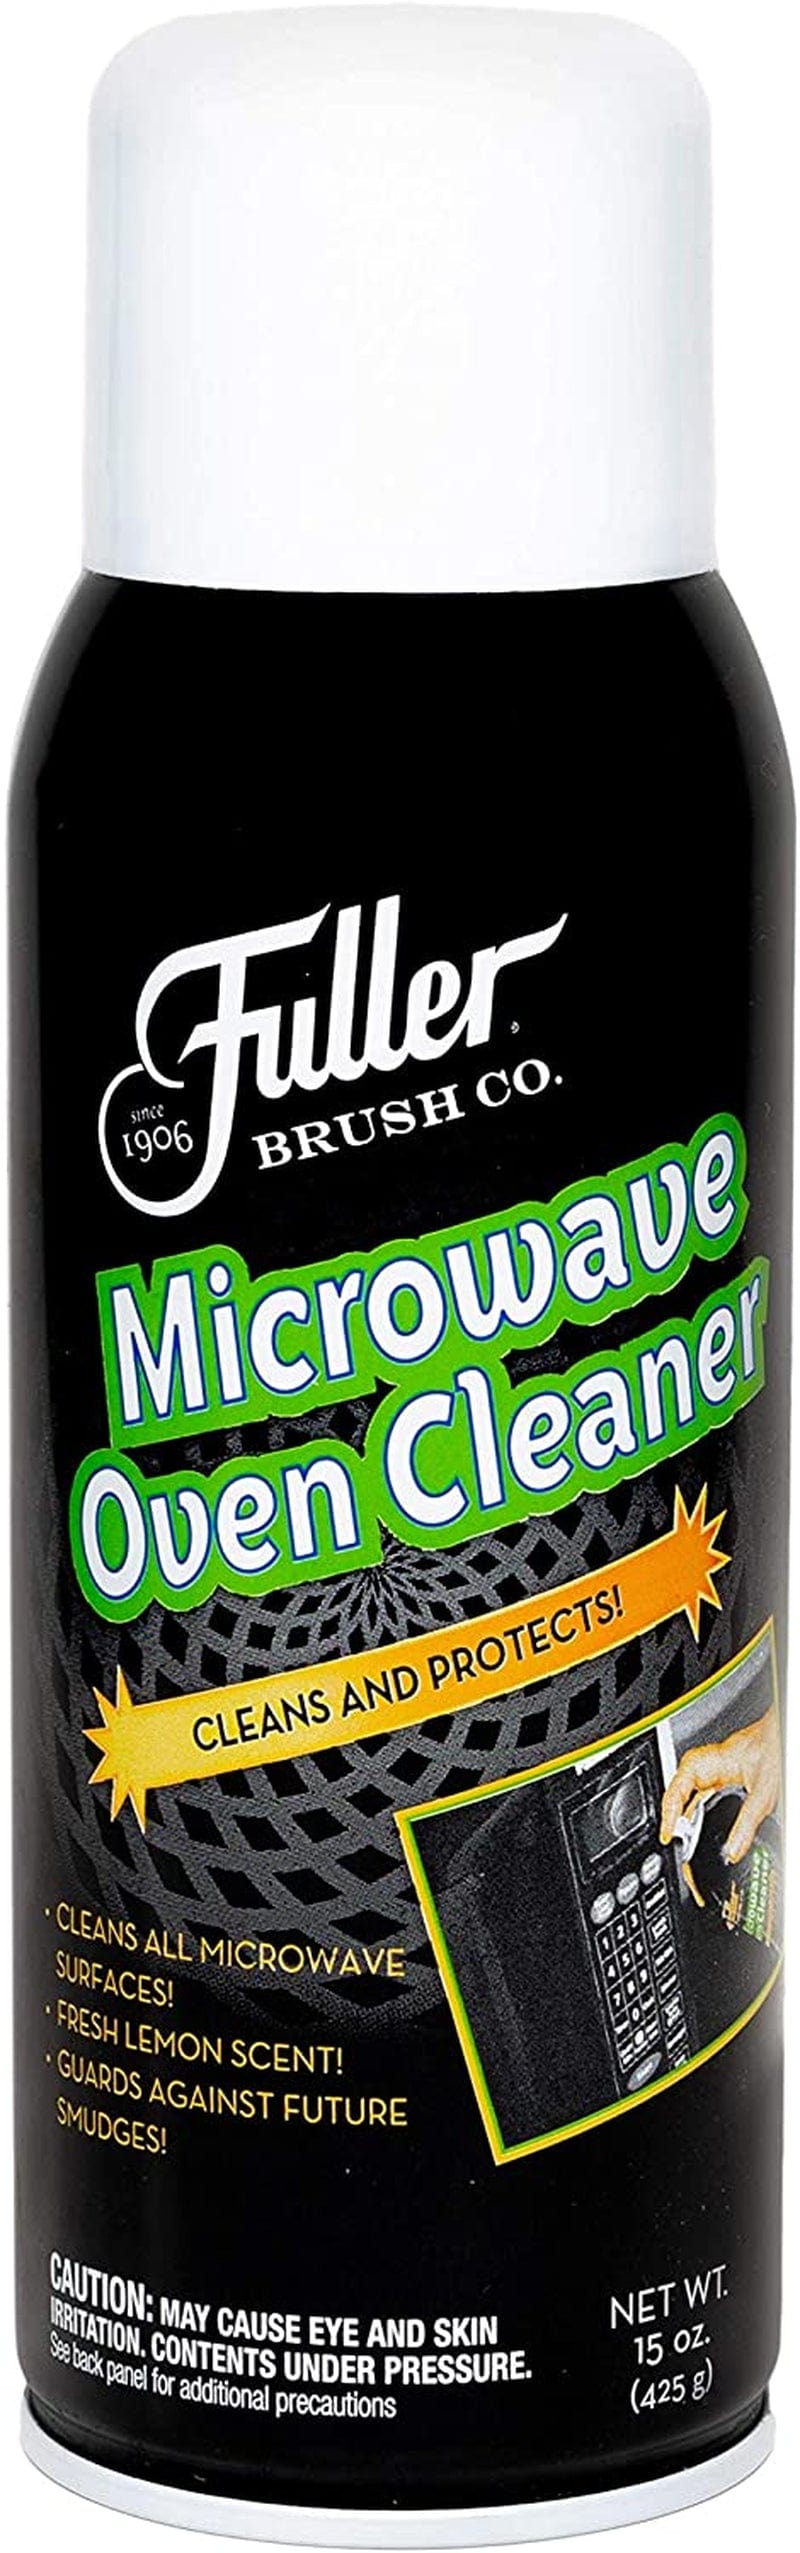 Fuller Brush Microwave Oven Cleaner -No Fume Commercial Micro Foam Cleaning Spray & Deodorizer for Convection Ovens & Turbo - Clean, Odor & Grease Free Kitchen Appliances Home & Garden > Household Supplies > Household Cleaning Supplies Fuller Brush Company 1 Pack (15 Ounce)  